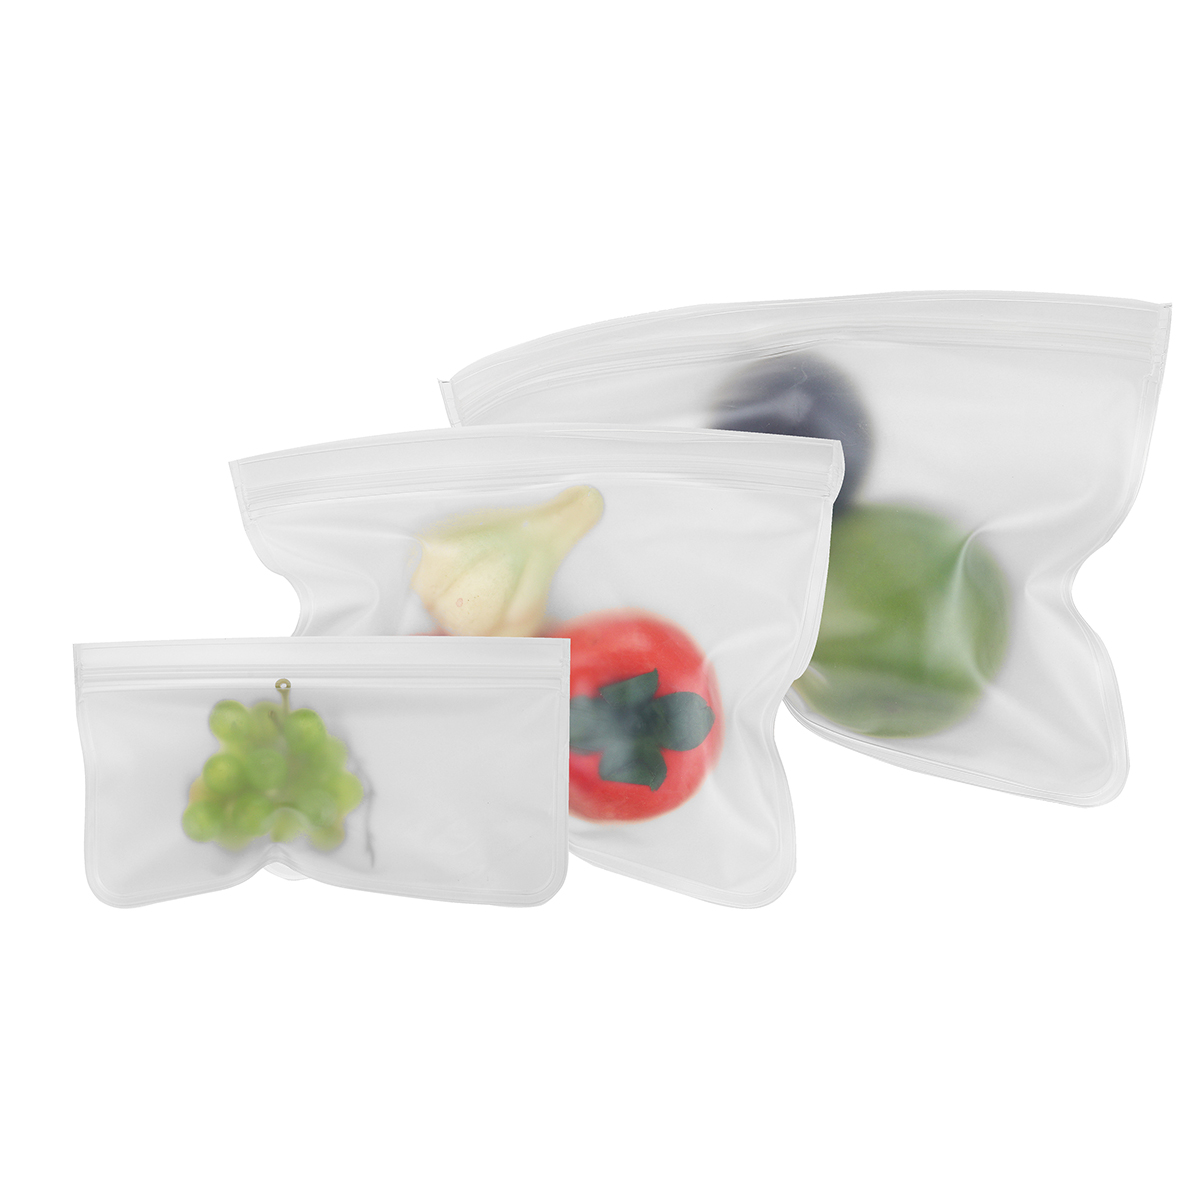 Food-Storage-Bags-Reusable-Silicone-Containers-for-Lunch-Vegetable-Resealable-Kitchen-Storage-Bag-1680145-9